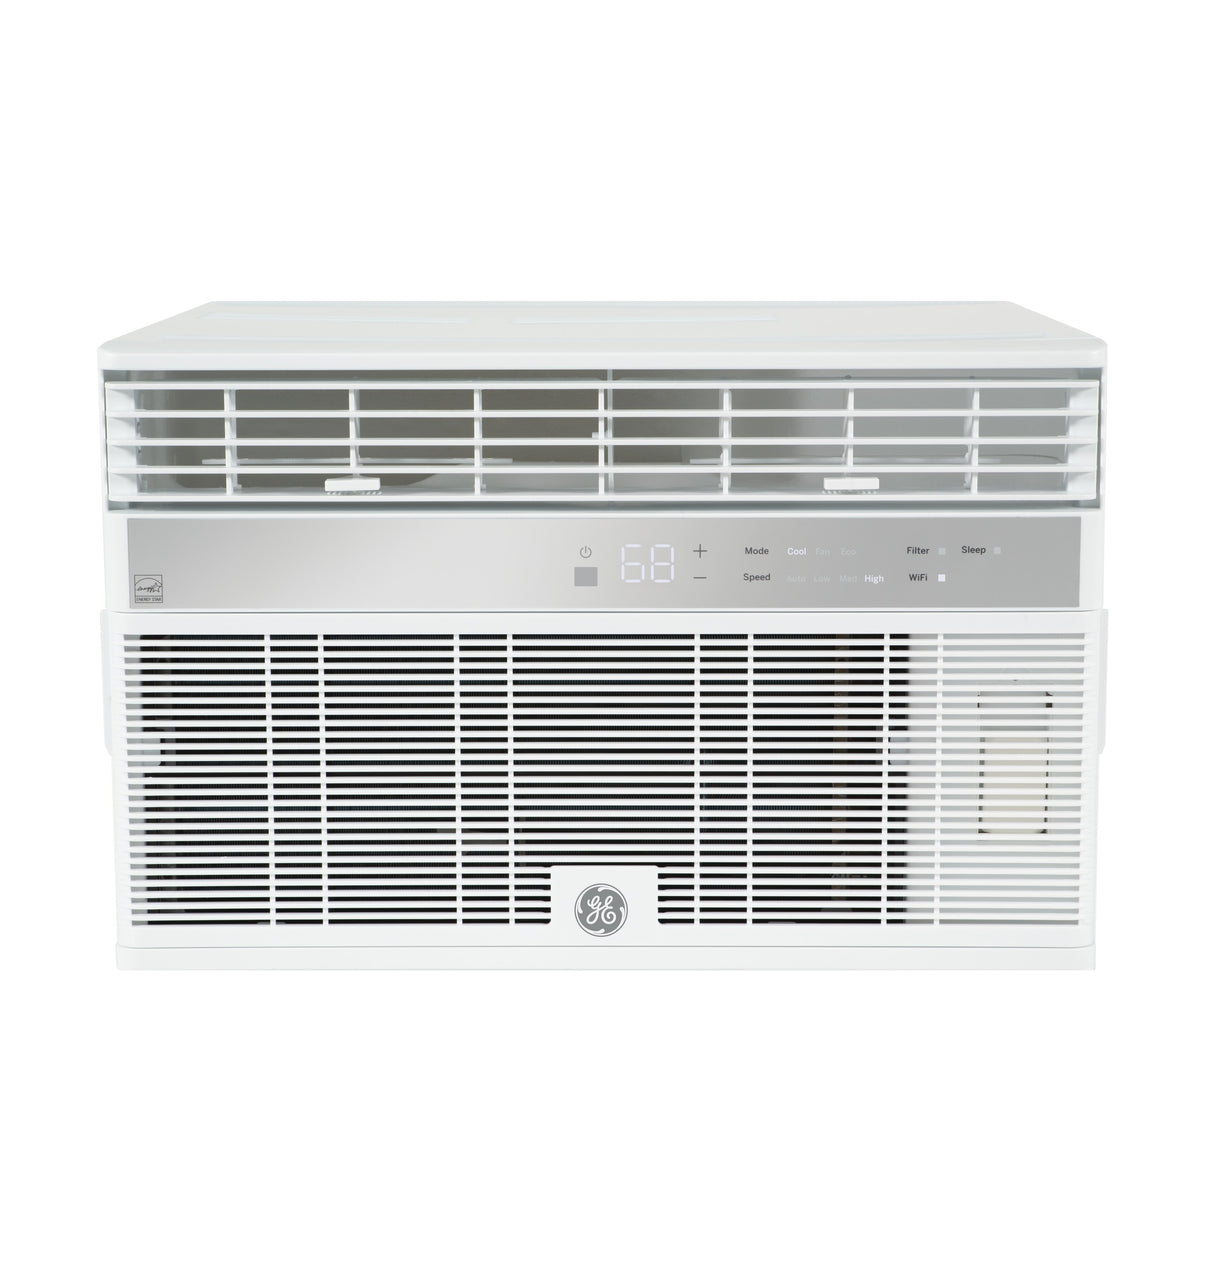 GE(R) ENERGY STAR(R) 14,000 BTU Smart Electronic Window Air Conditioner for Large Rooms up to 700 sq. ft. - (AHY14LZ)